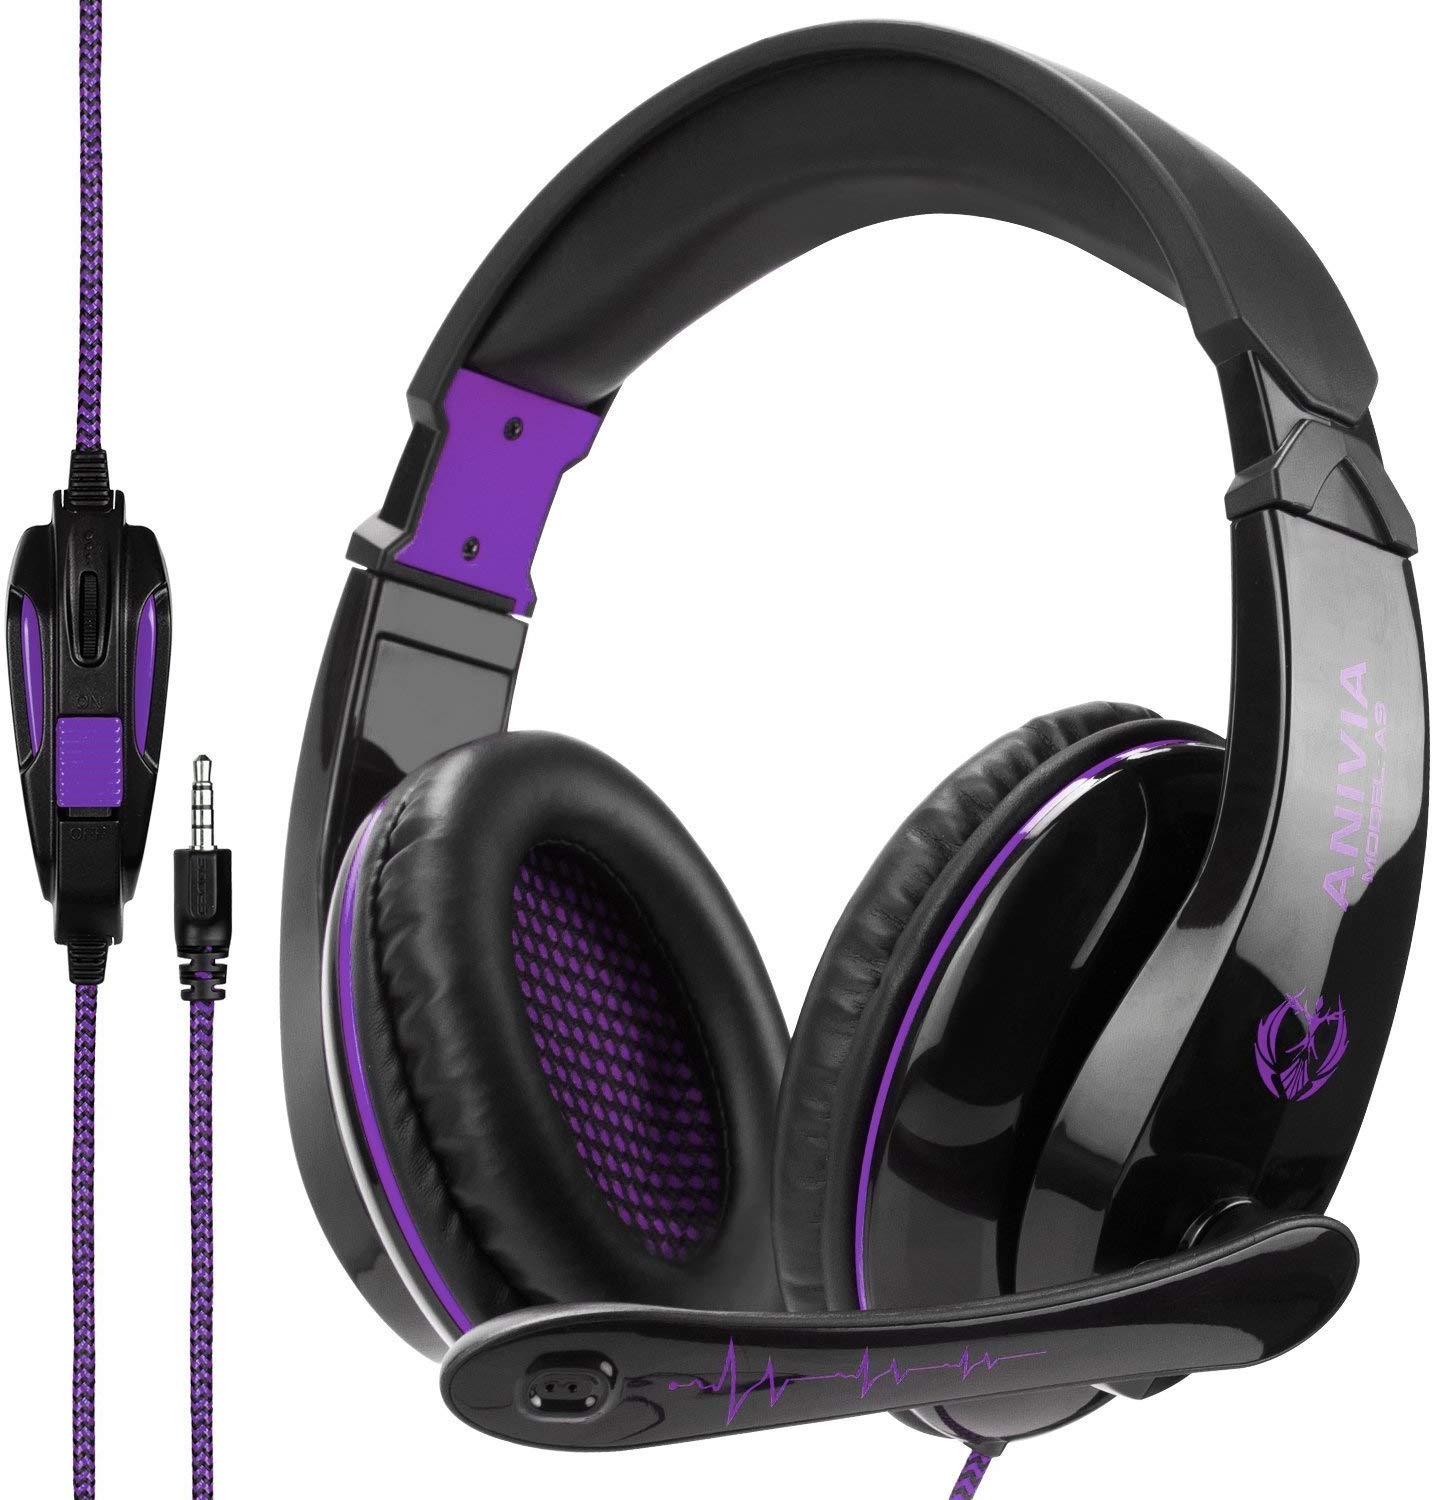 Anivia A9 PS4 Gaming Headset Headphone Over Ear Setero Gaming Headset with Microphone,Noise Canceling 3.5mm Jack for PS4 New Xbox One/Mac /PC/Computer,(Black Purple)